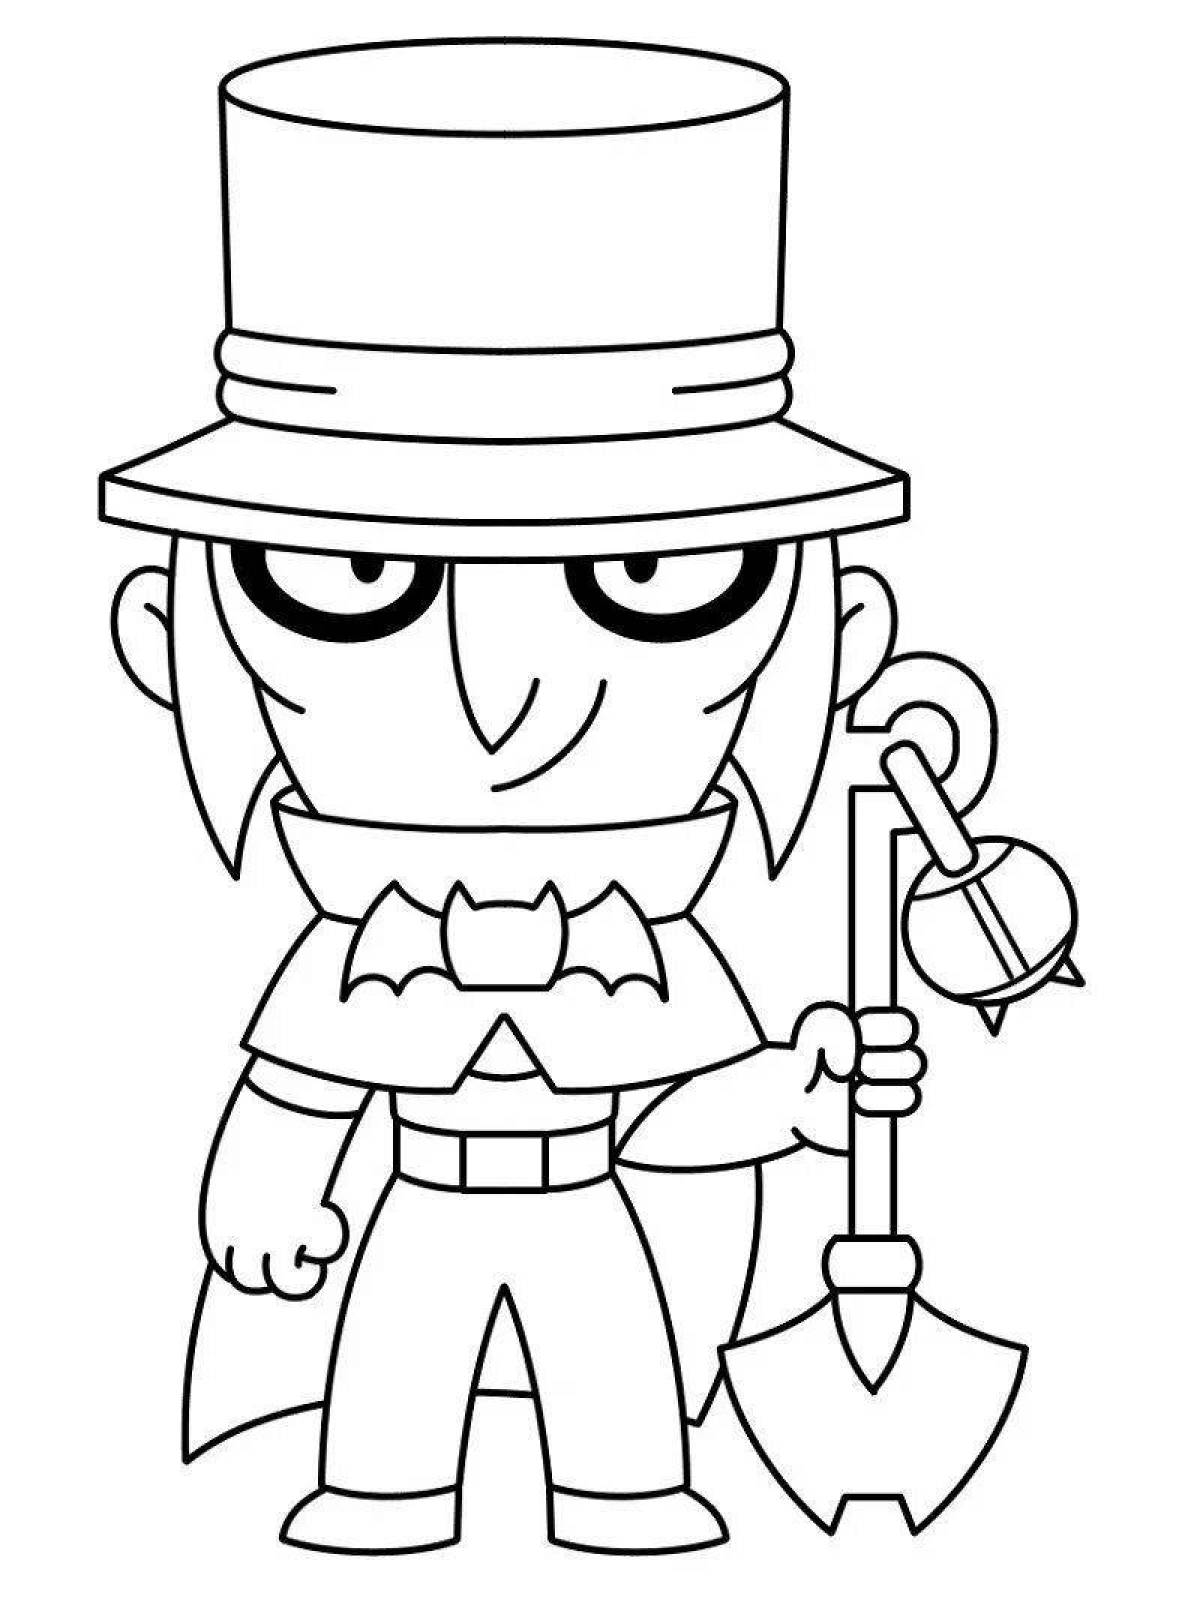 Brawl stars live coloring pages